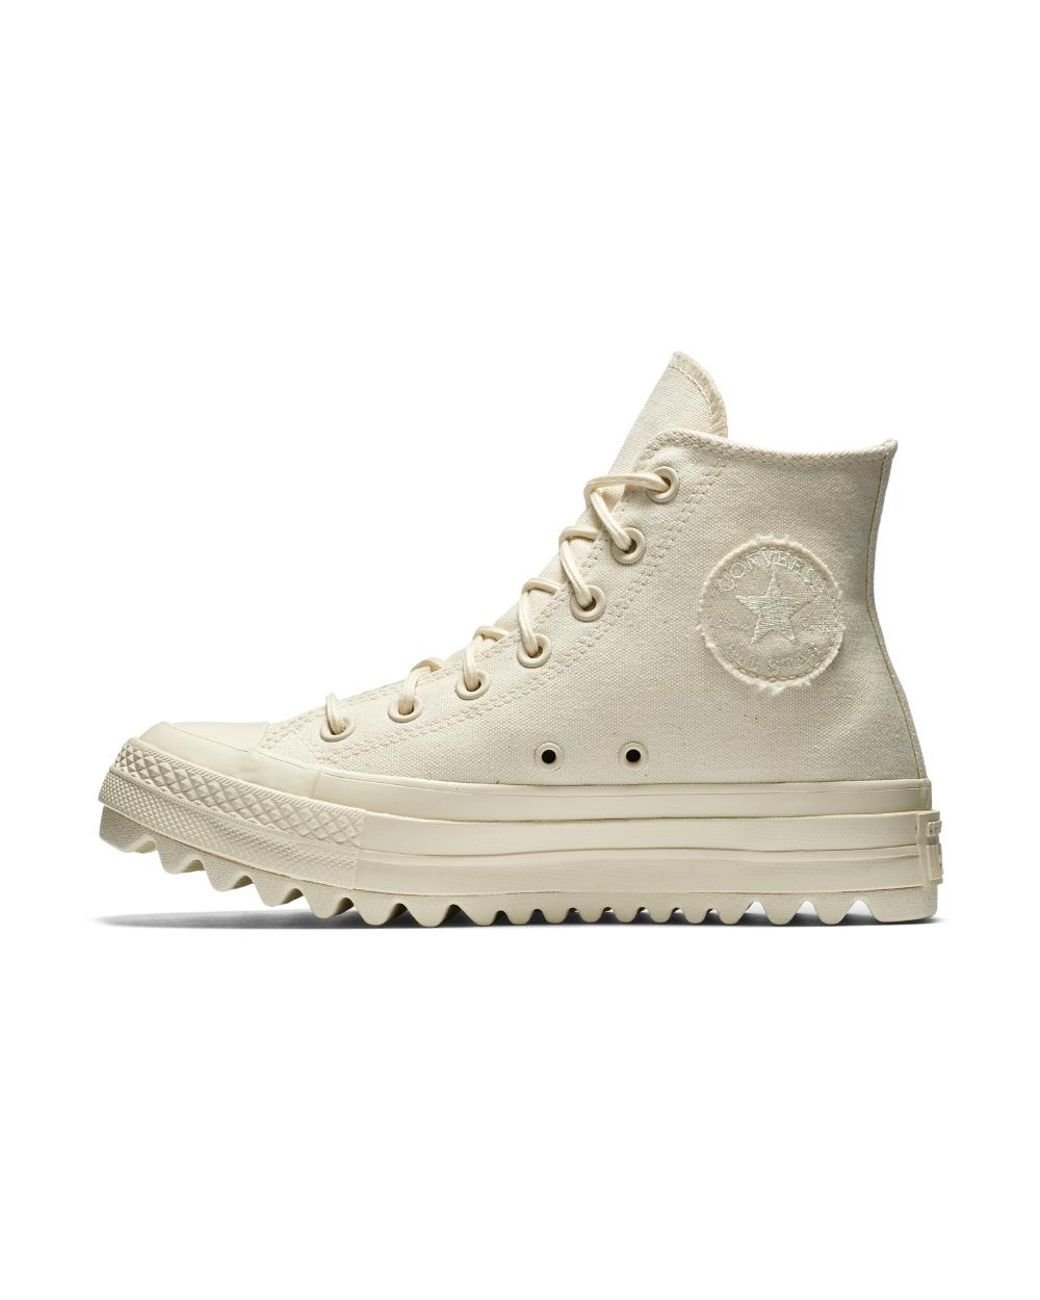 Converse Chuck Taylor All Star Lift Ripple Canvas High Top Women's Shoe in  Cream (Natural) | Lyst